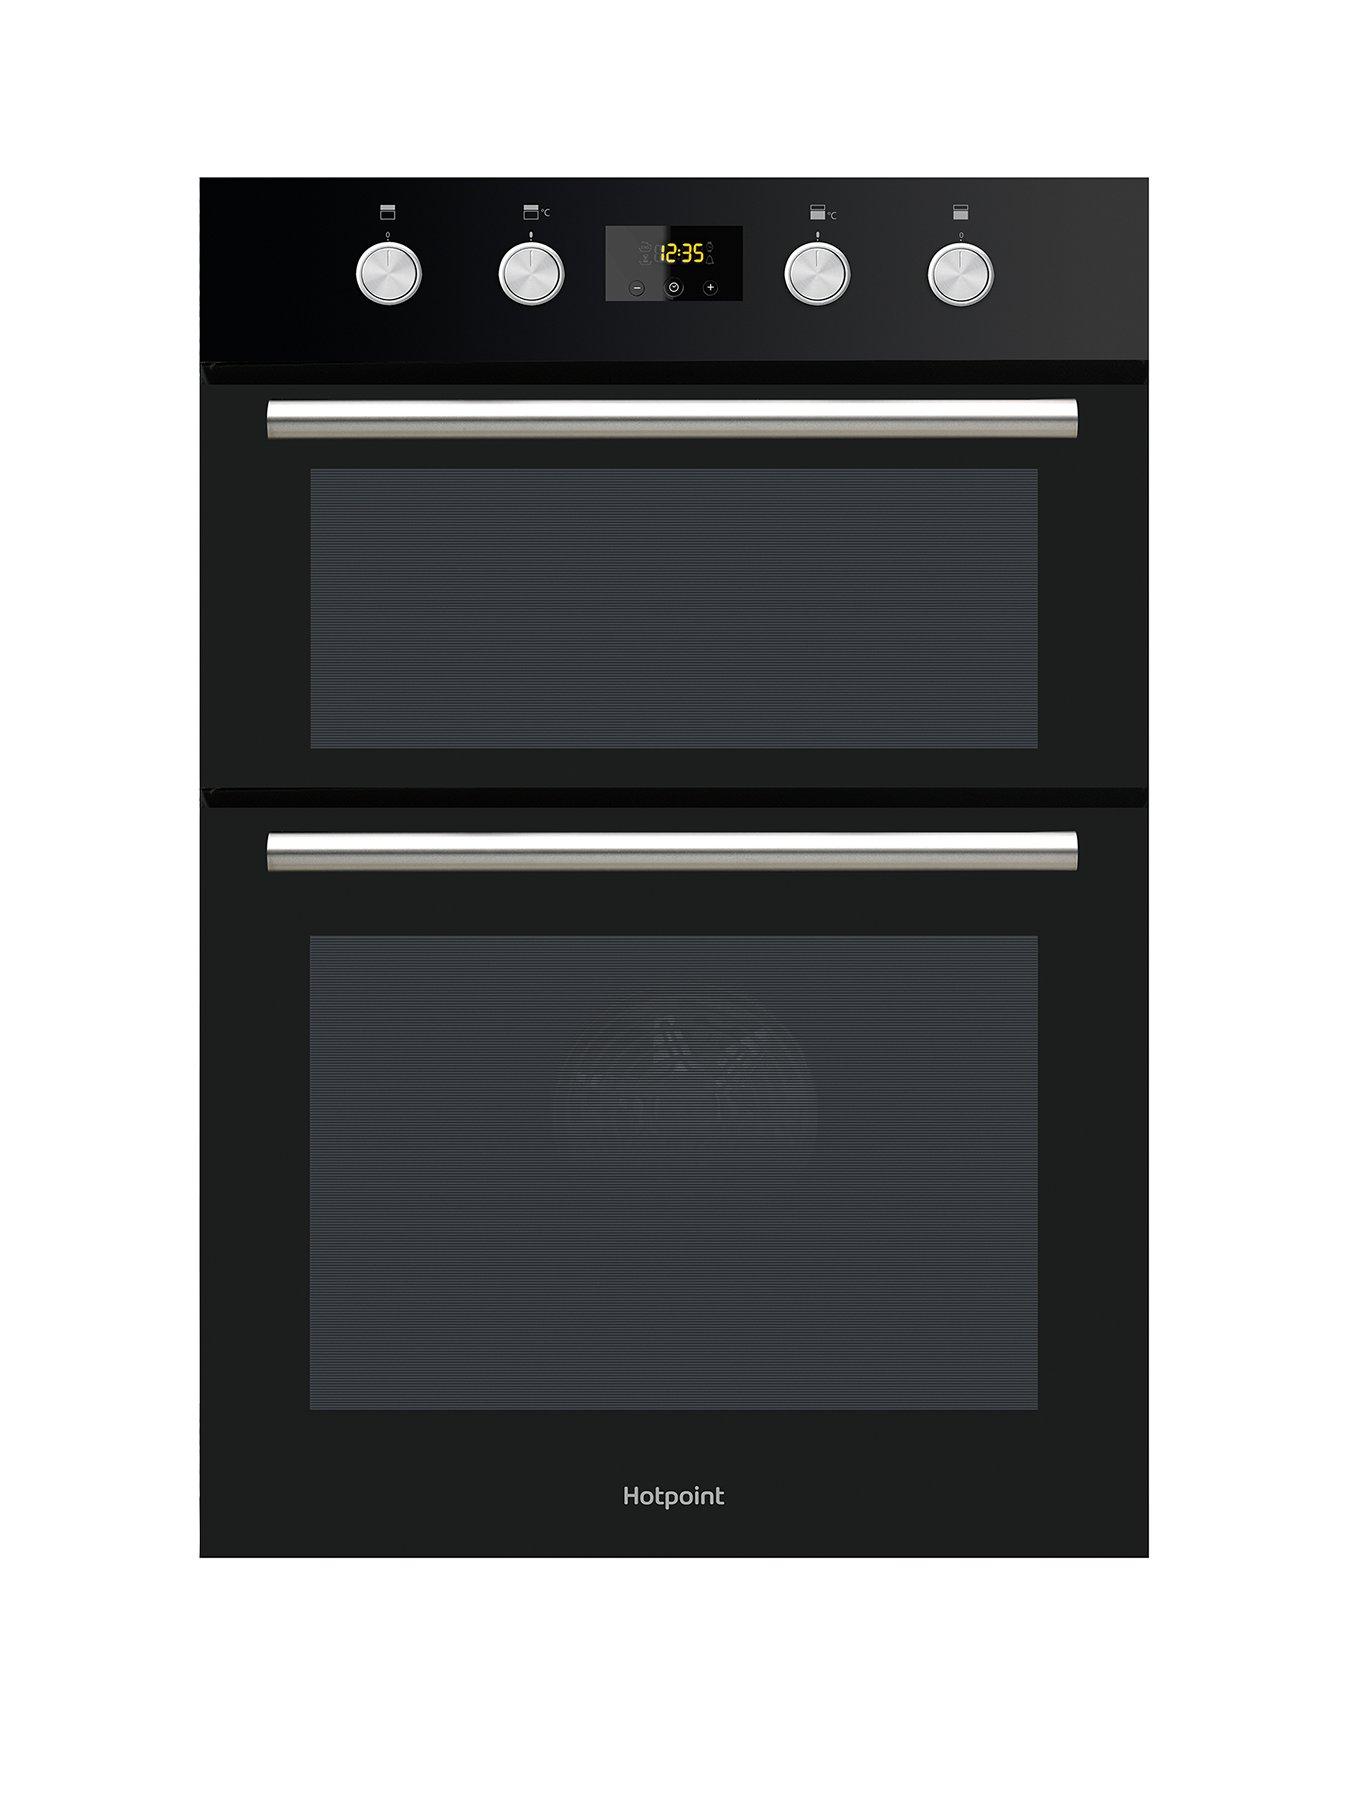 Hotpoint Class 2 Dd2844Cbl 60Cm Built-In Double Electric Oven - Black - Oven Only